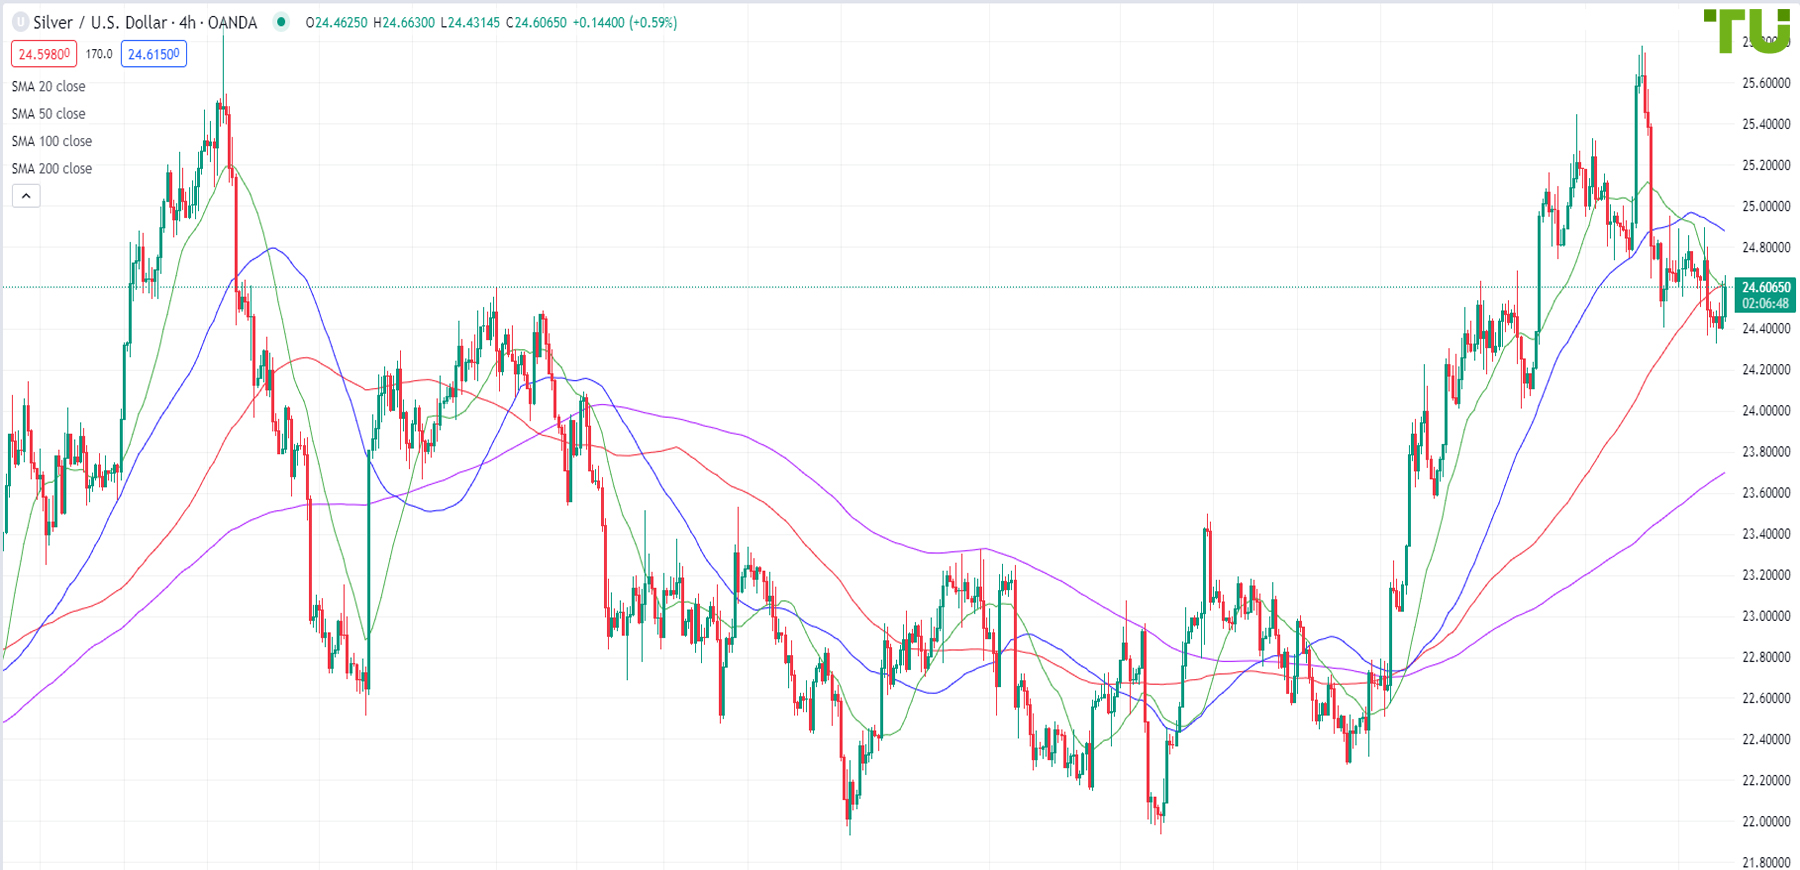 XAG/USD is trying to return to resistance